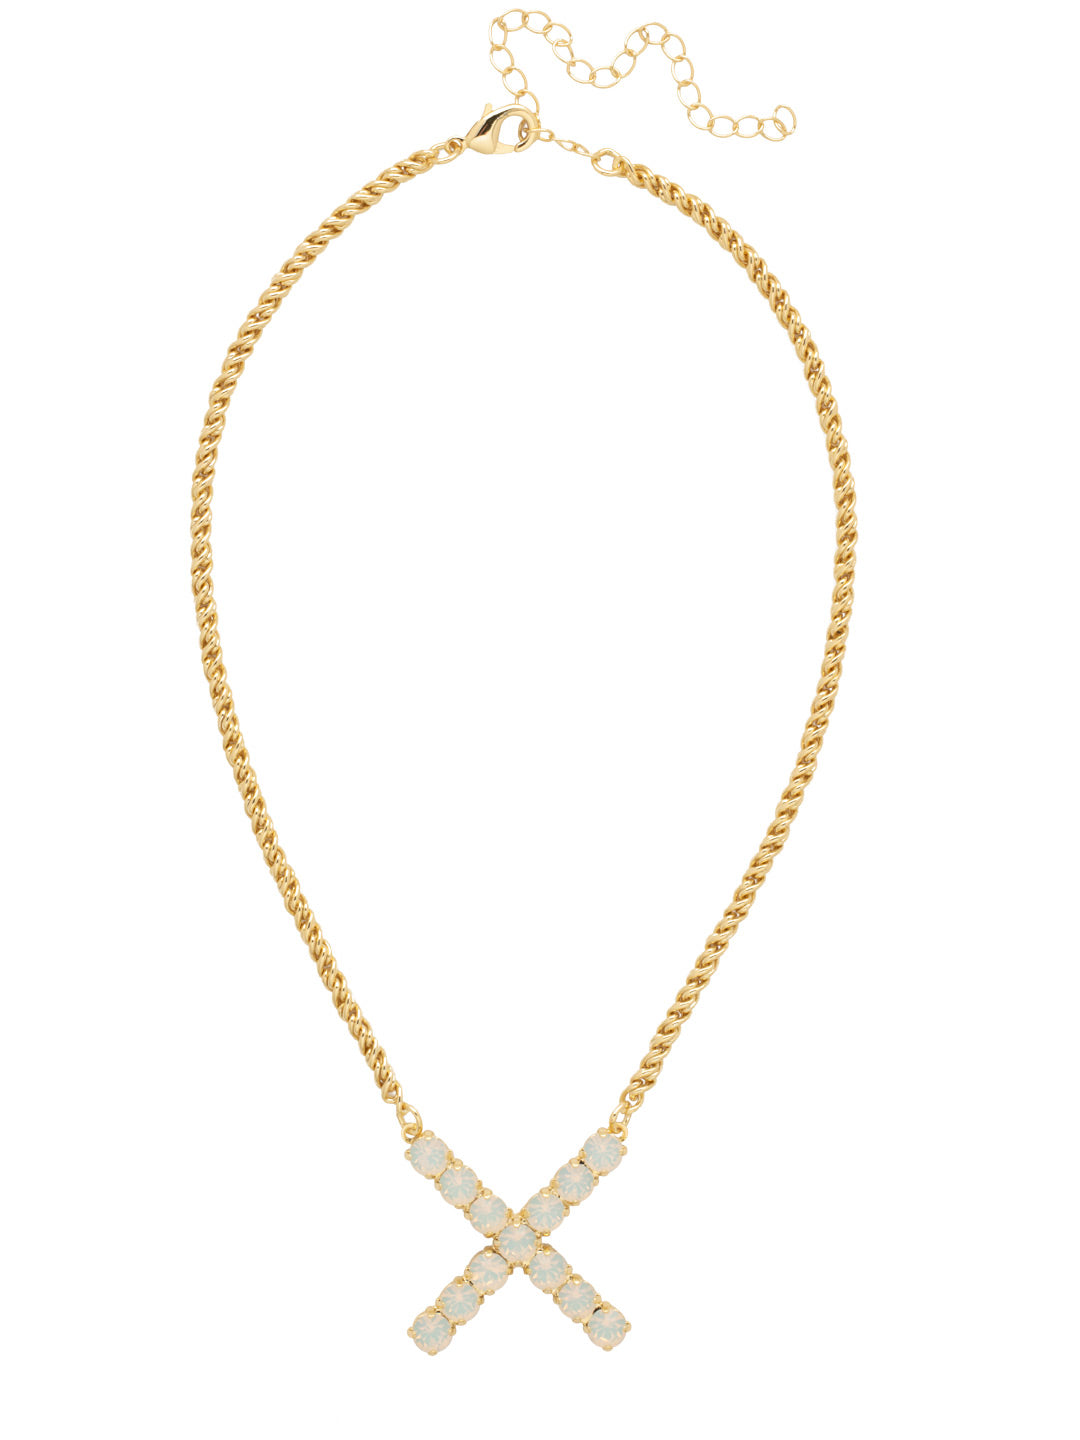 X Initial Rope Pendant Necklace - NFK43BGWO